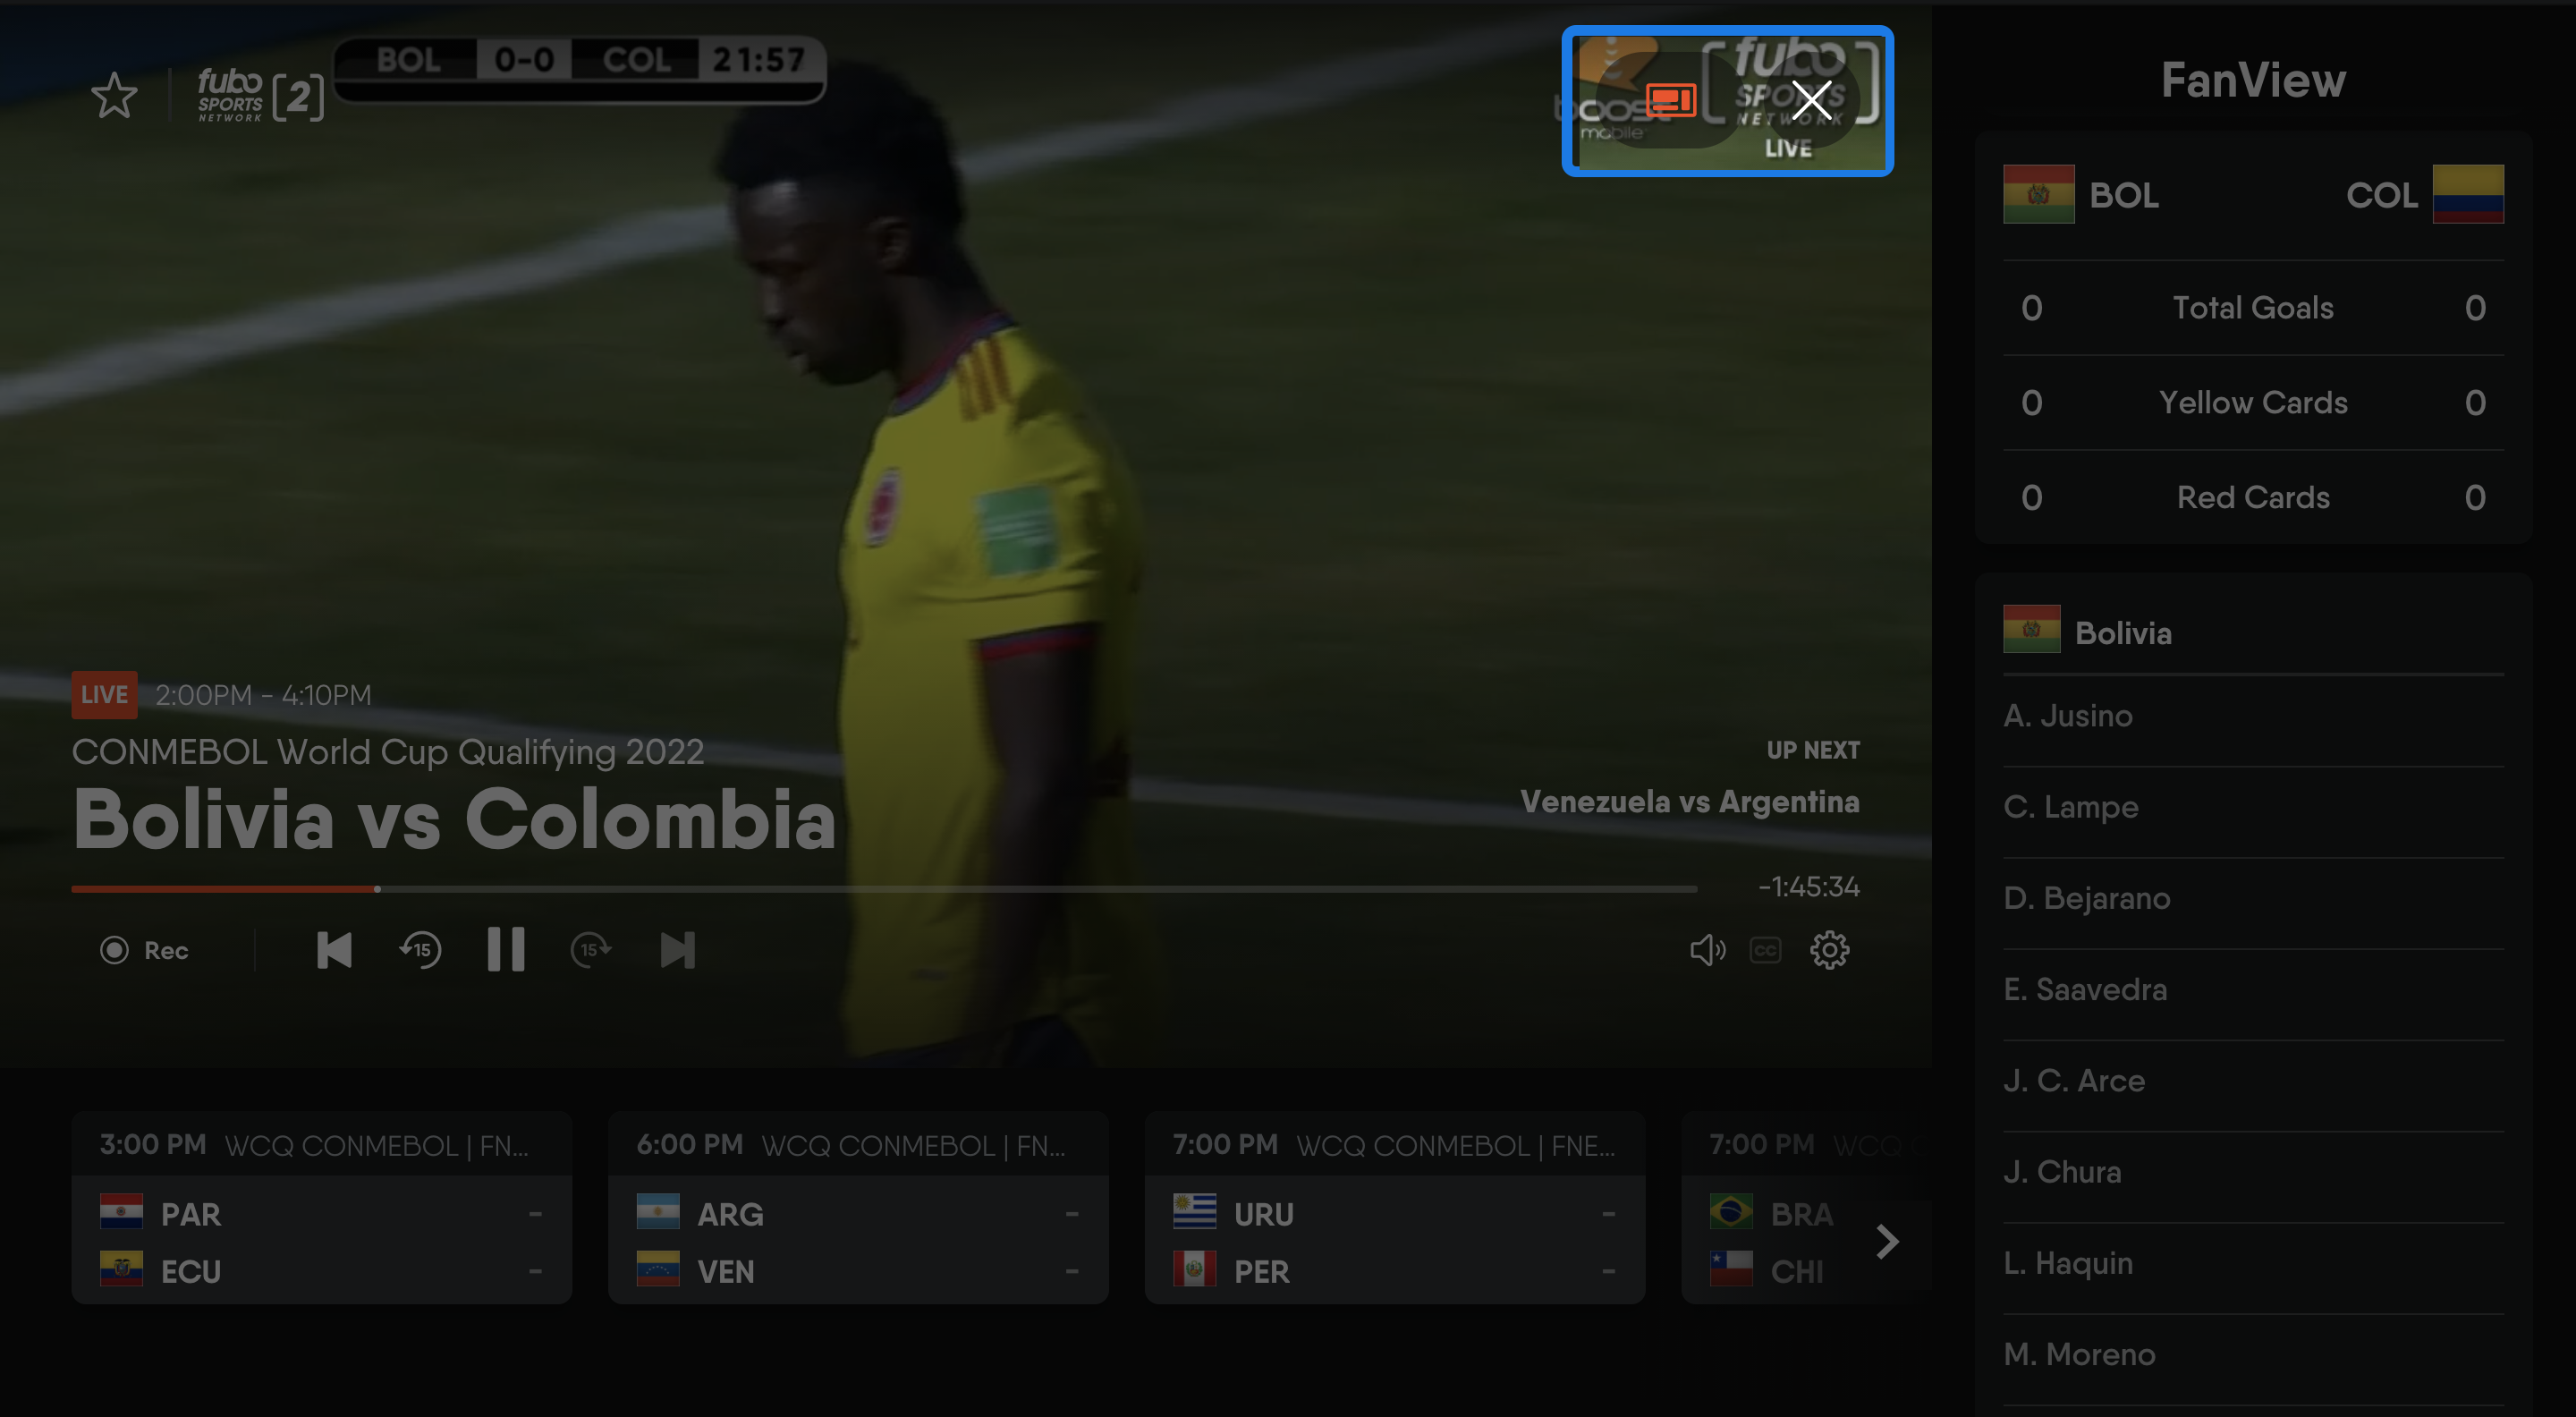 Watching FuboTV on a browser with FanView enabled; toggle at top-right highlighted - click to disable FanView